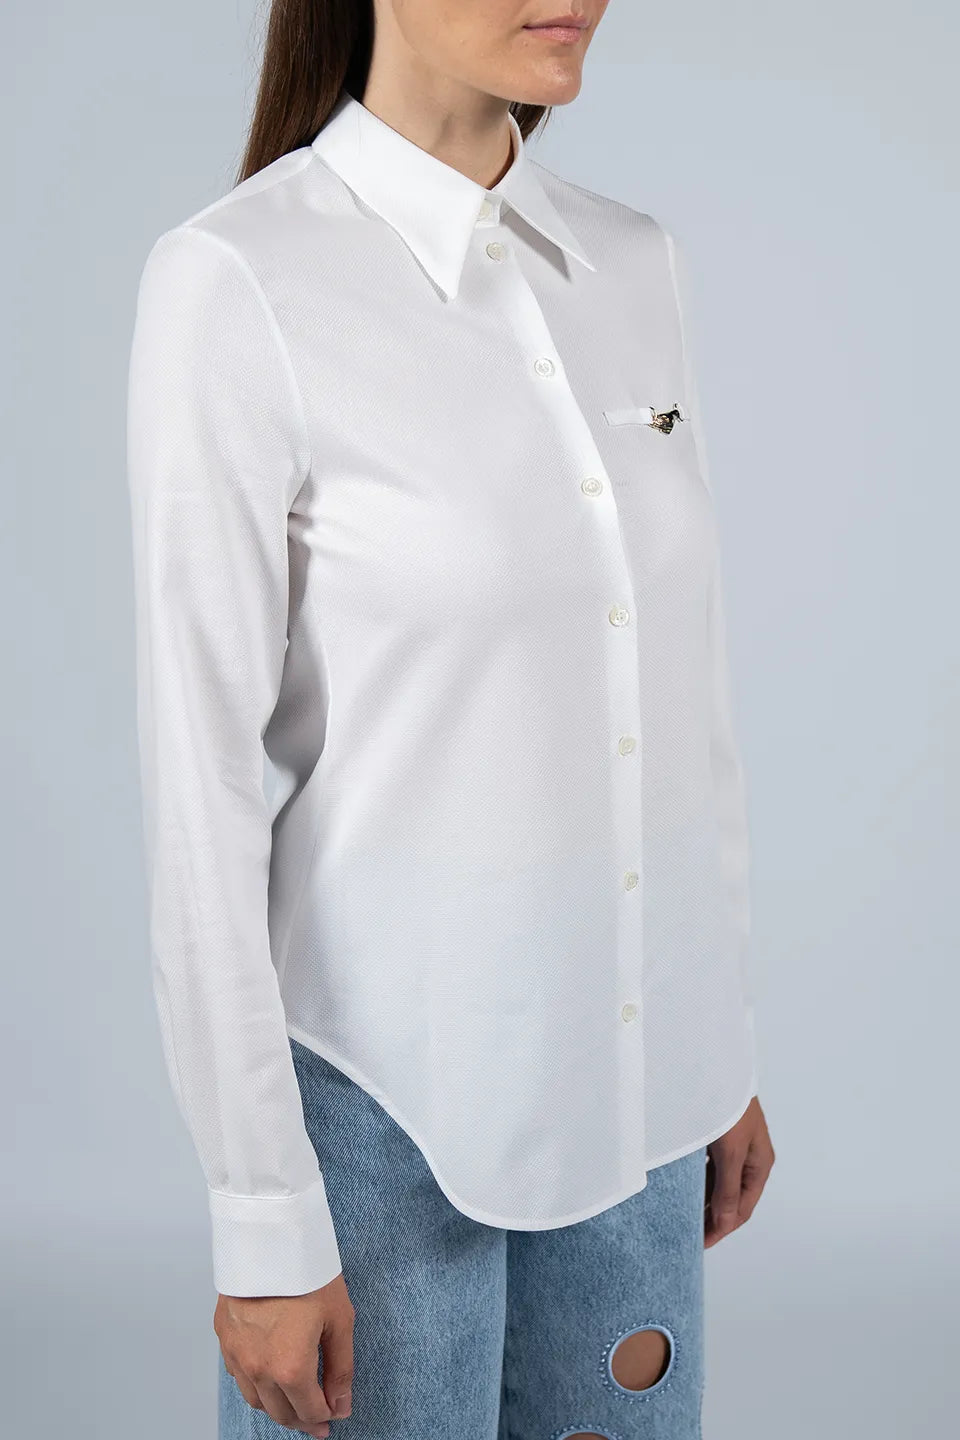 Designer White Shirt, shop online with free delivery in UAE. Product gallery 2